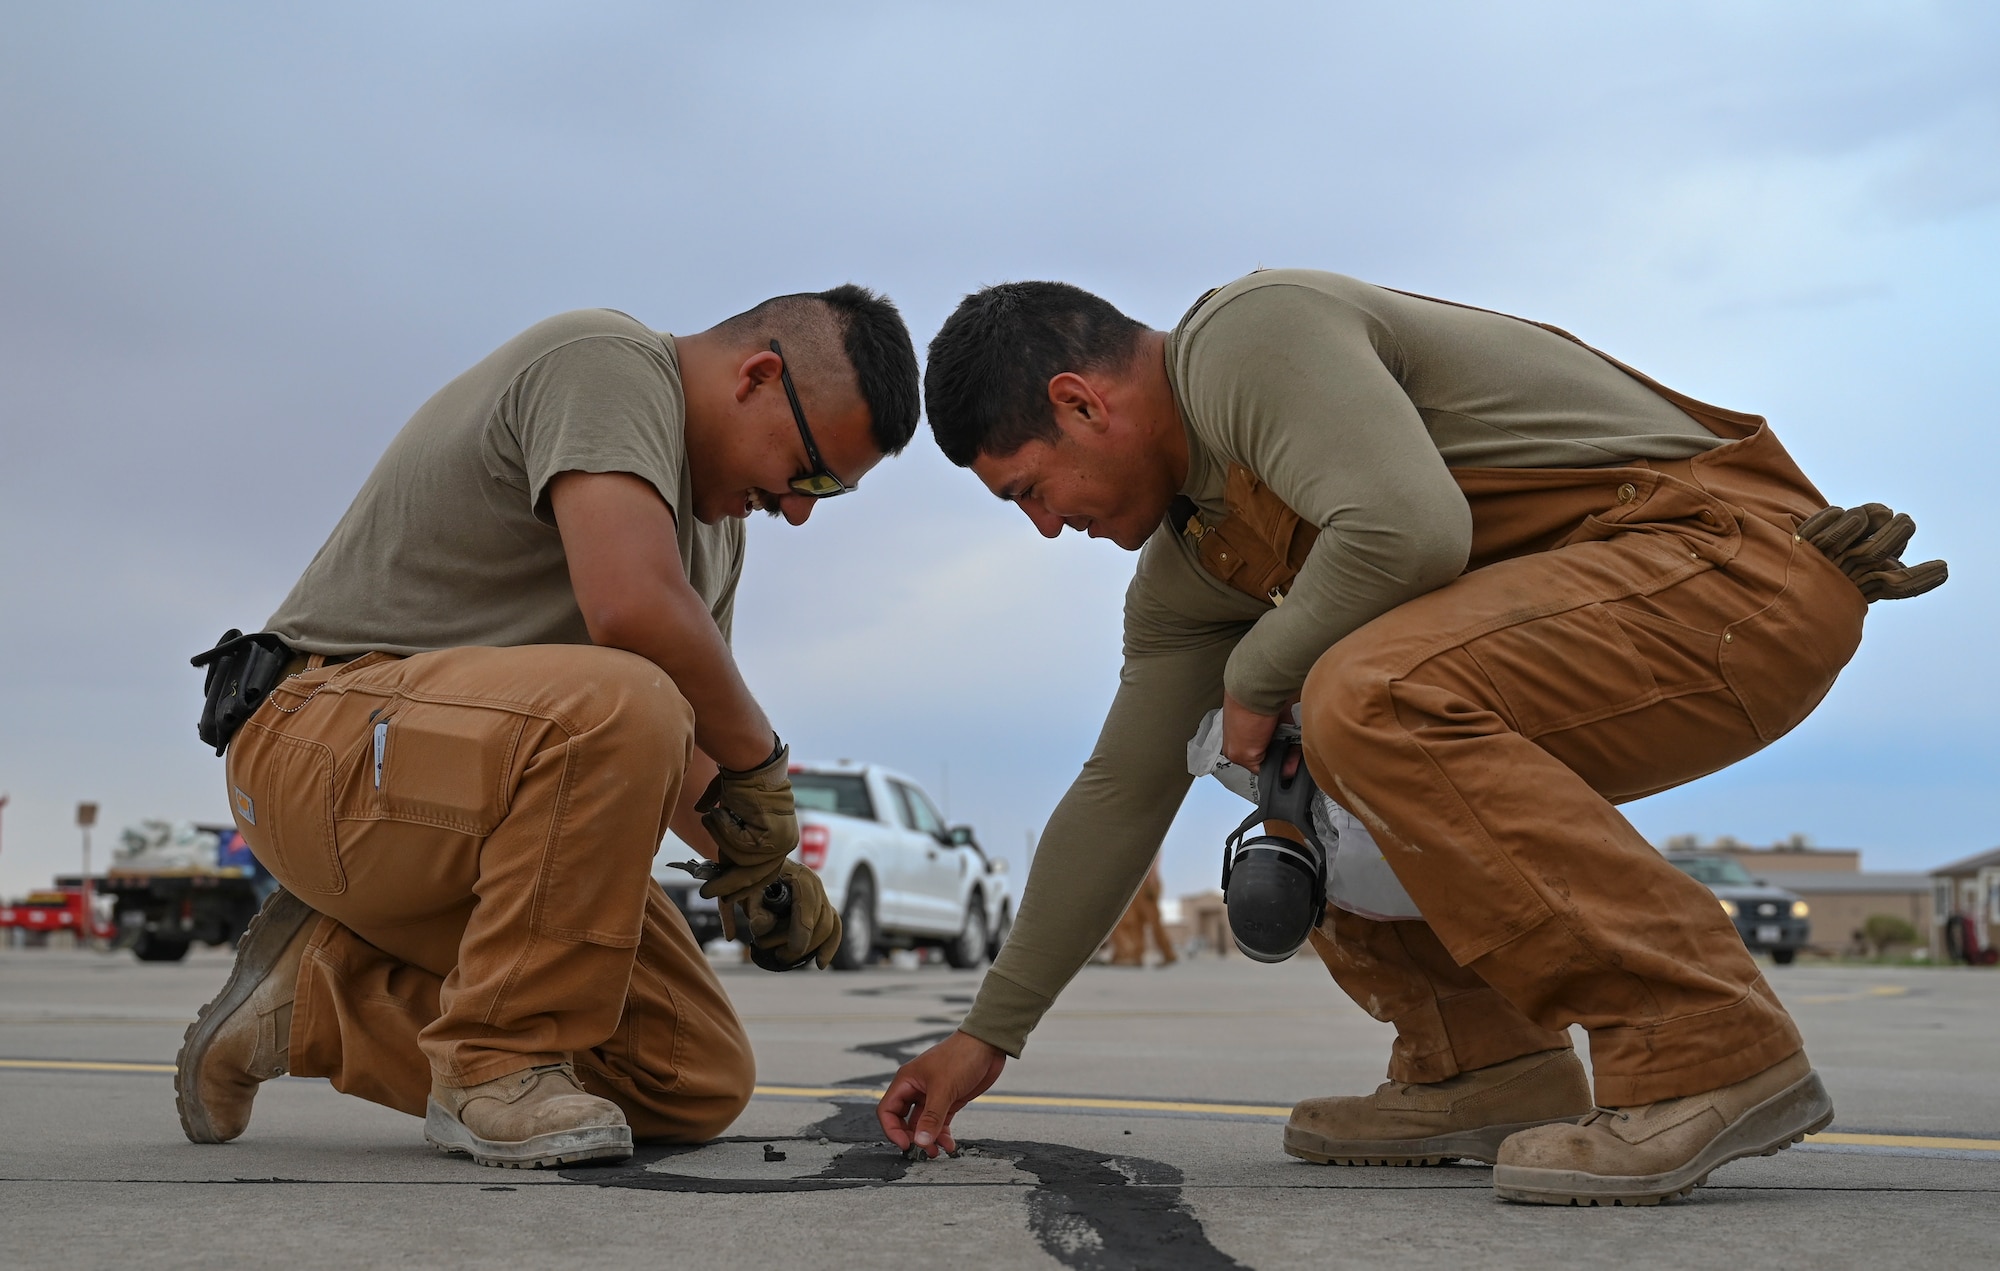 U.S. Air Force Airman 1st Class Aaron Escoto, left, and U.S. Air Force Airman 1st Class Jorge Capistran, 49th Civil Engineer Squadron pavement and construction equipment journeymen, inspect sealant installed during a previous pavement repair at Holloman Air Force Base, New Mexico, June 30, 2023. The 49th CES “Dirt Boyz” Airmen are responsible for maintaining Holloman’s infrastructure by using a variety of tools to complete construction projects. (U.S. Air Force photo by Airman 1st Class Michelle Ferrari)